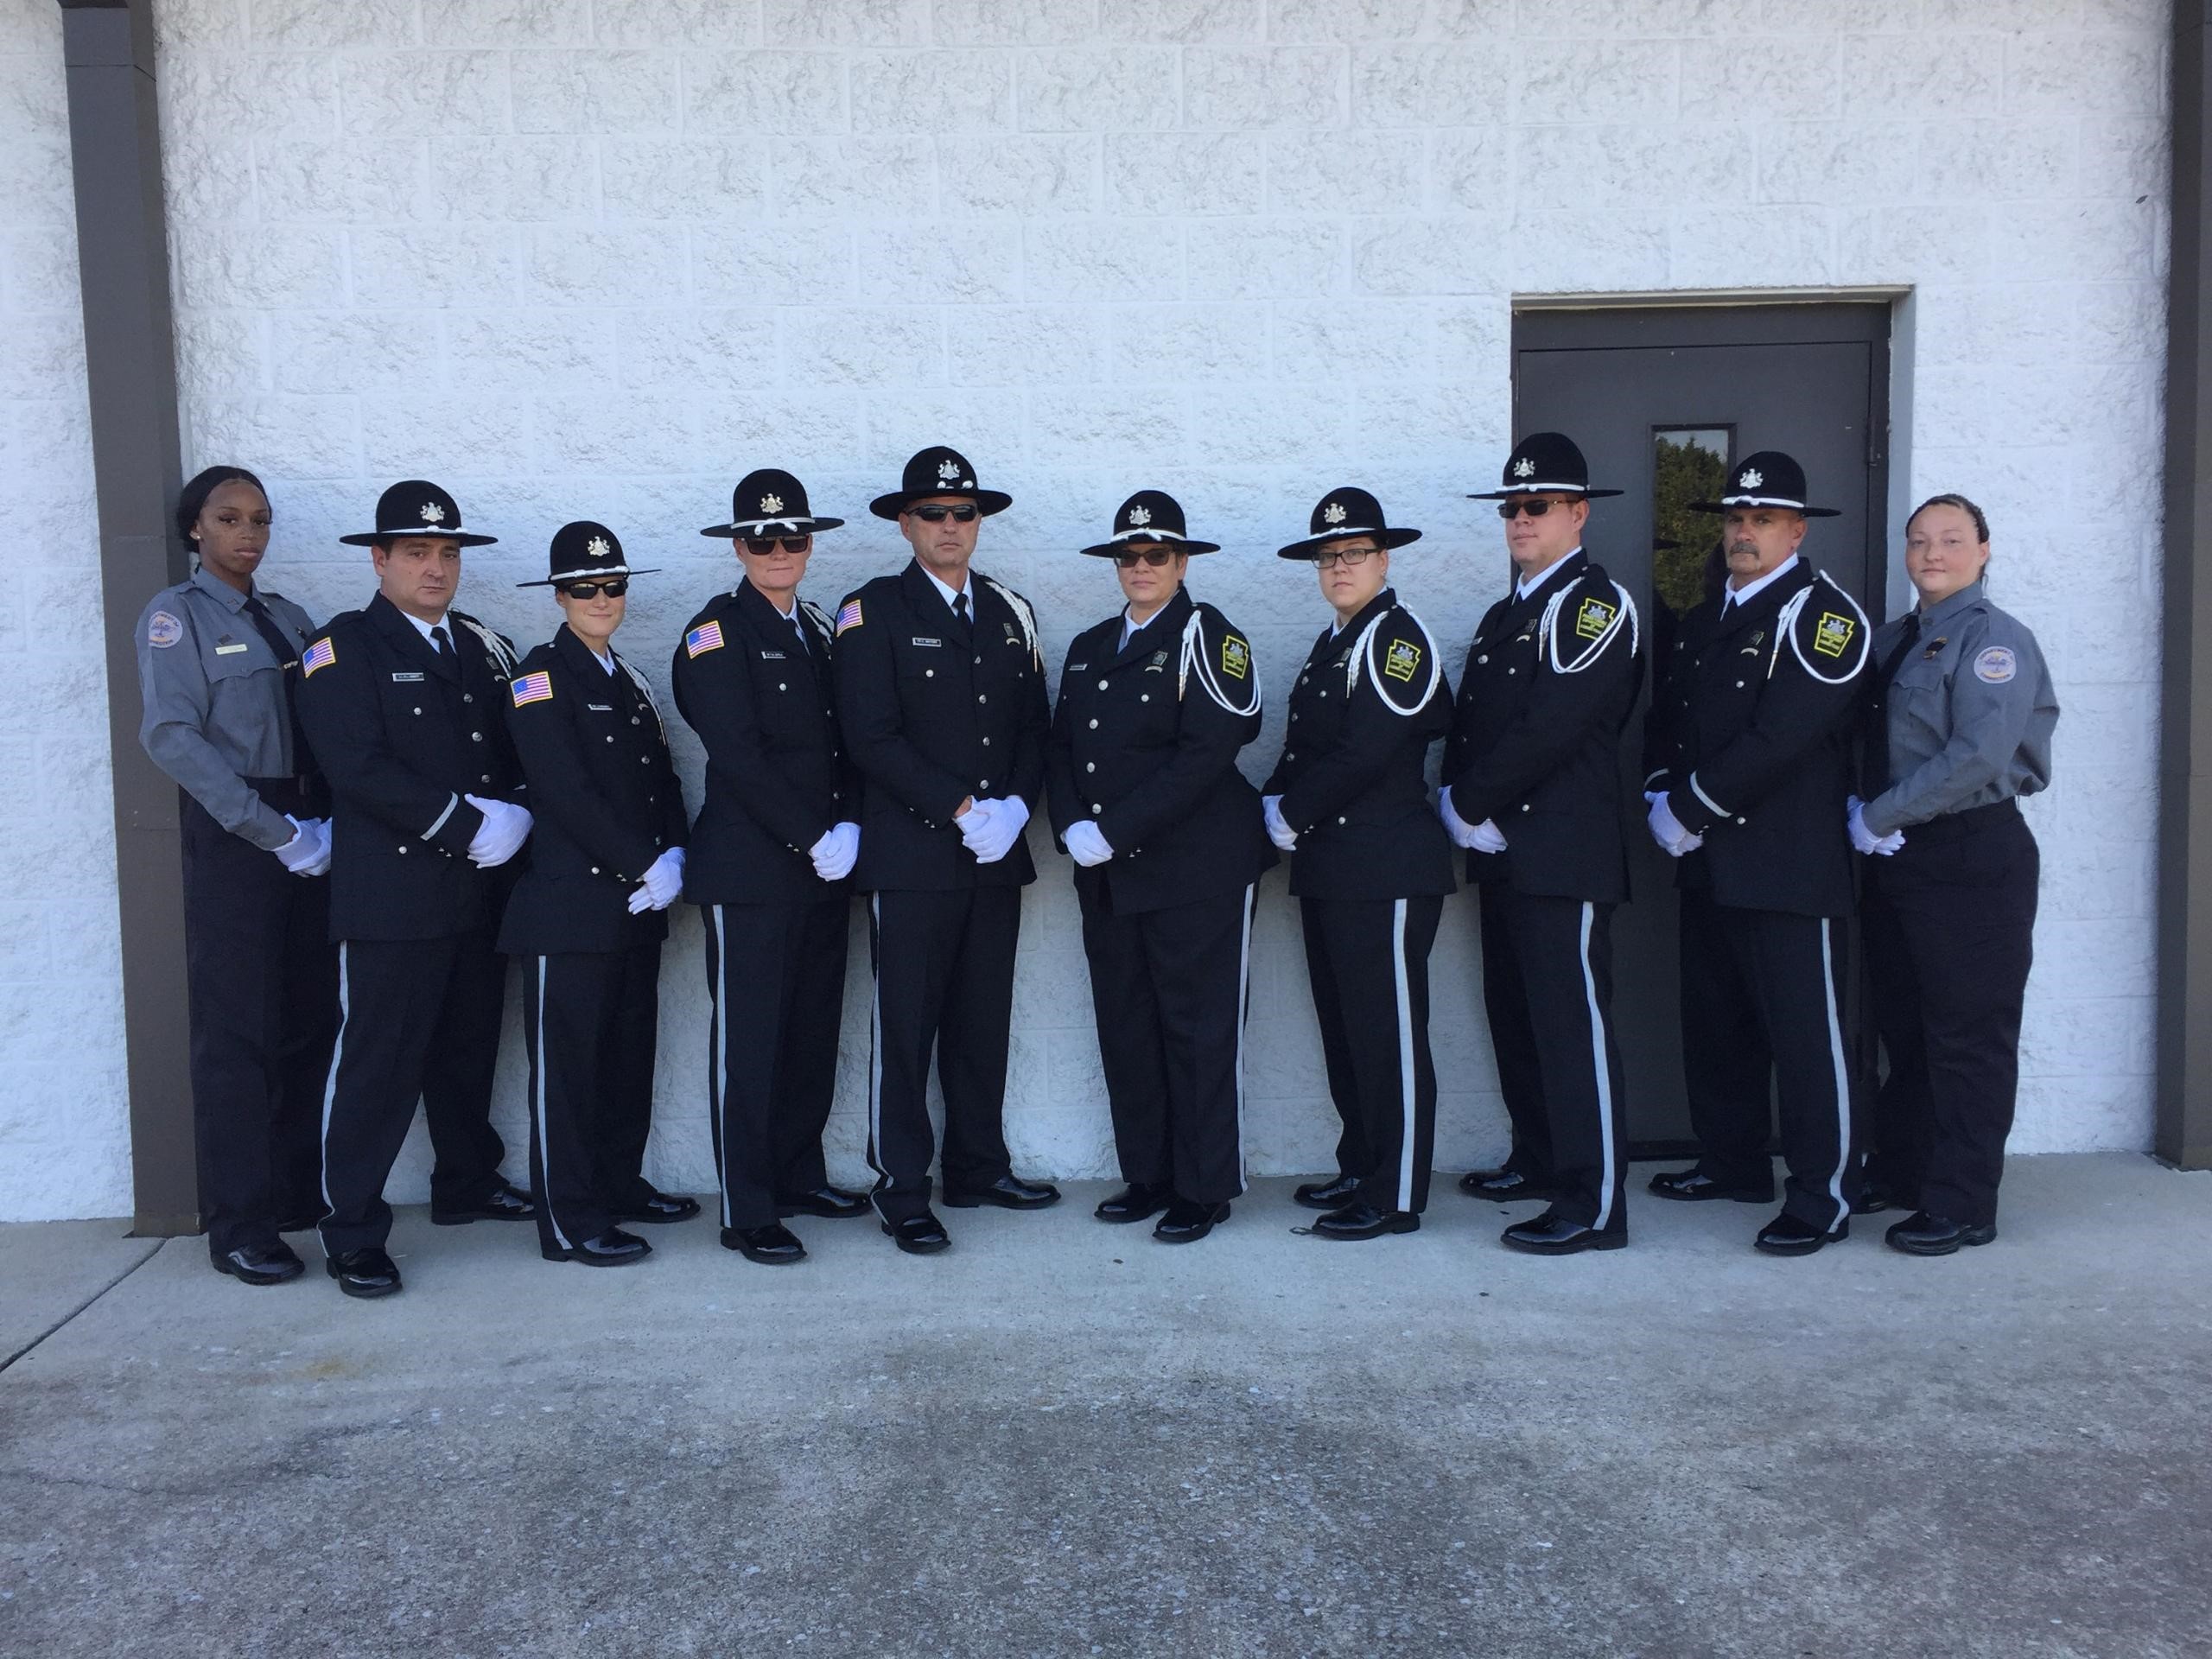 The SCI Somerset Honor Guard